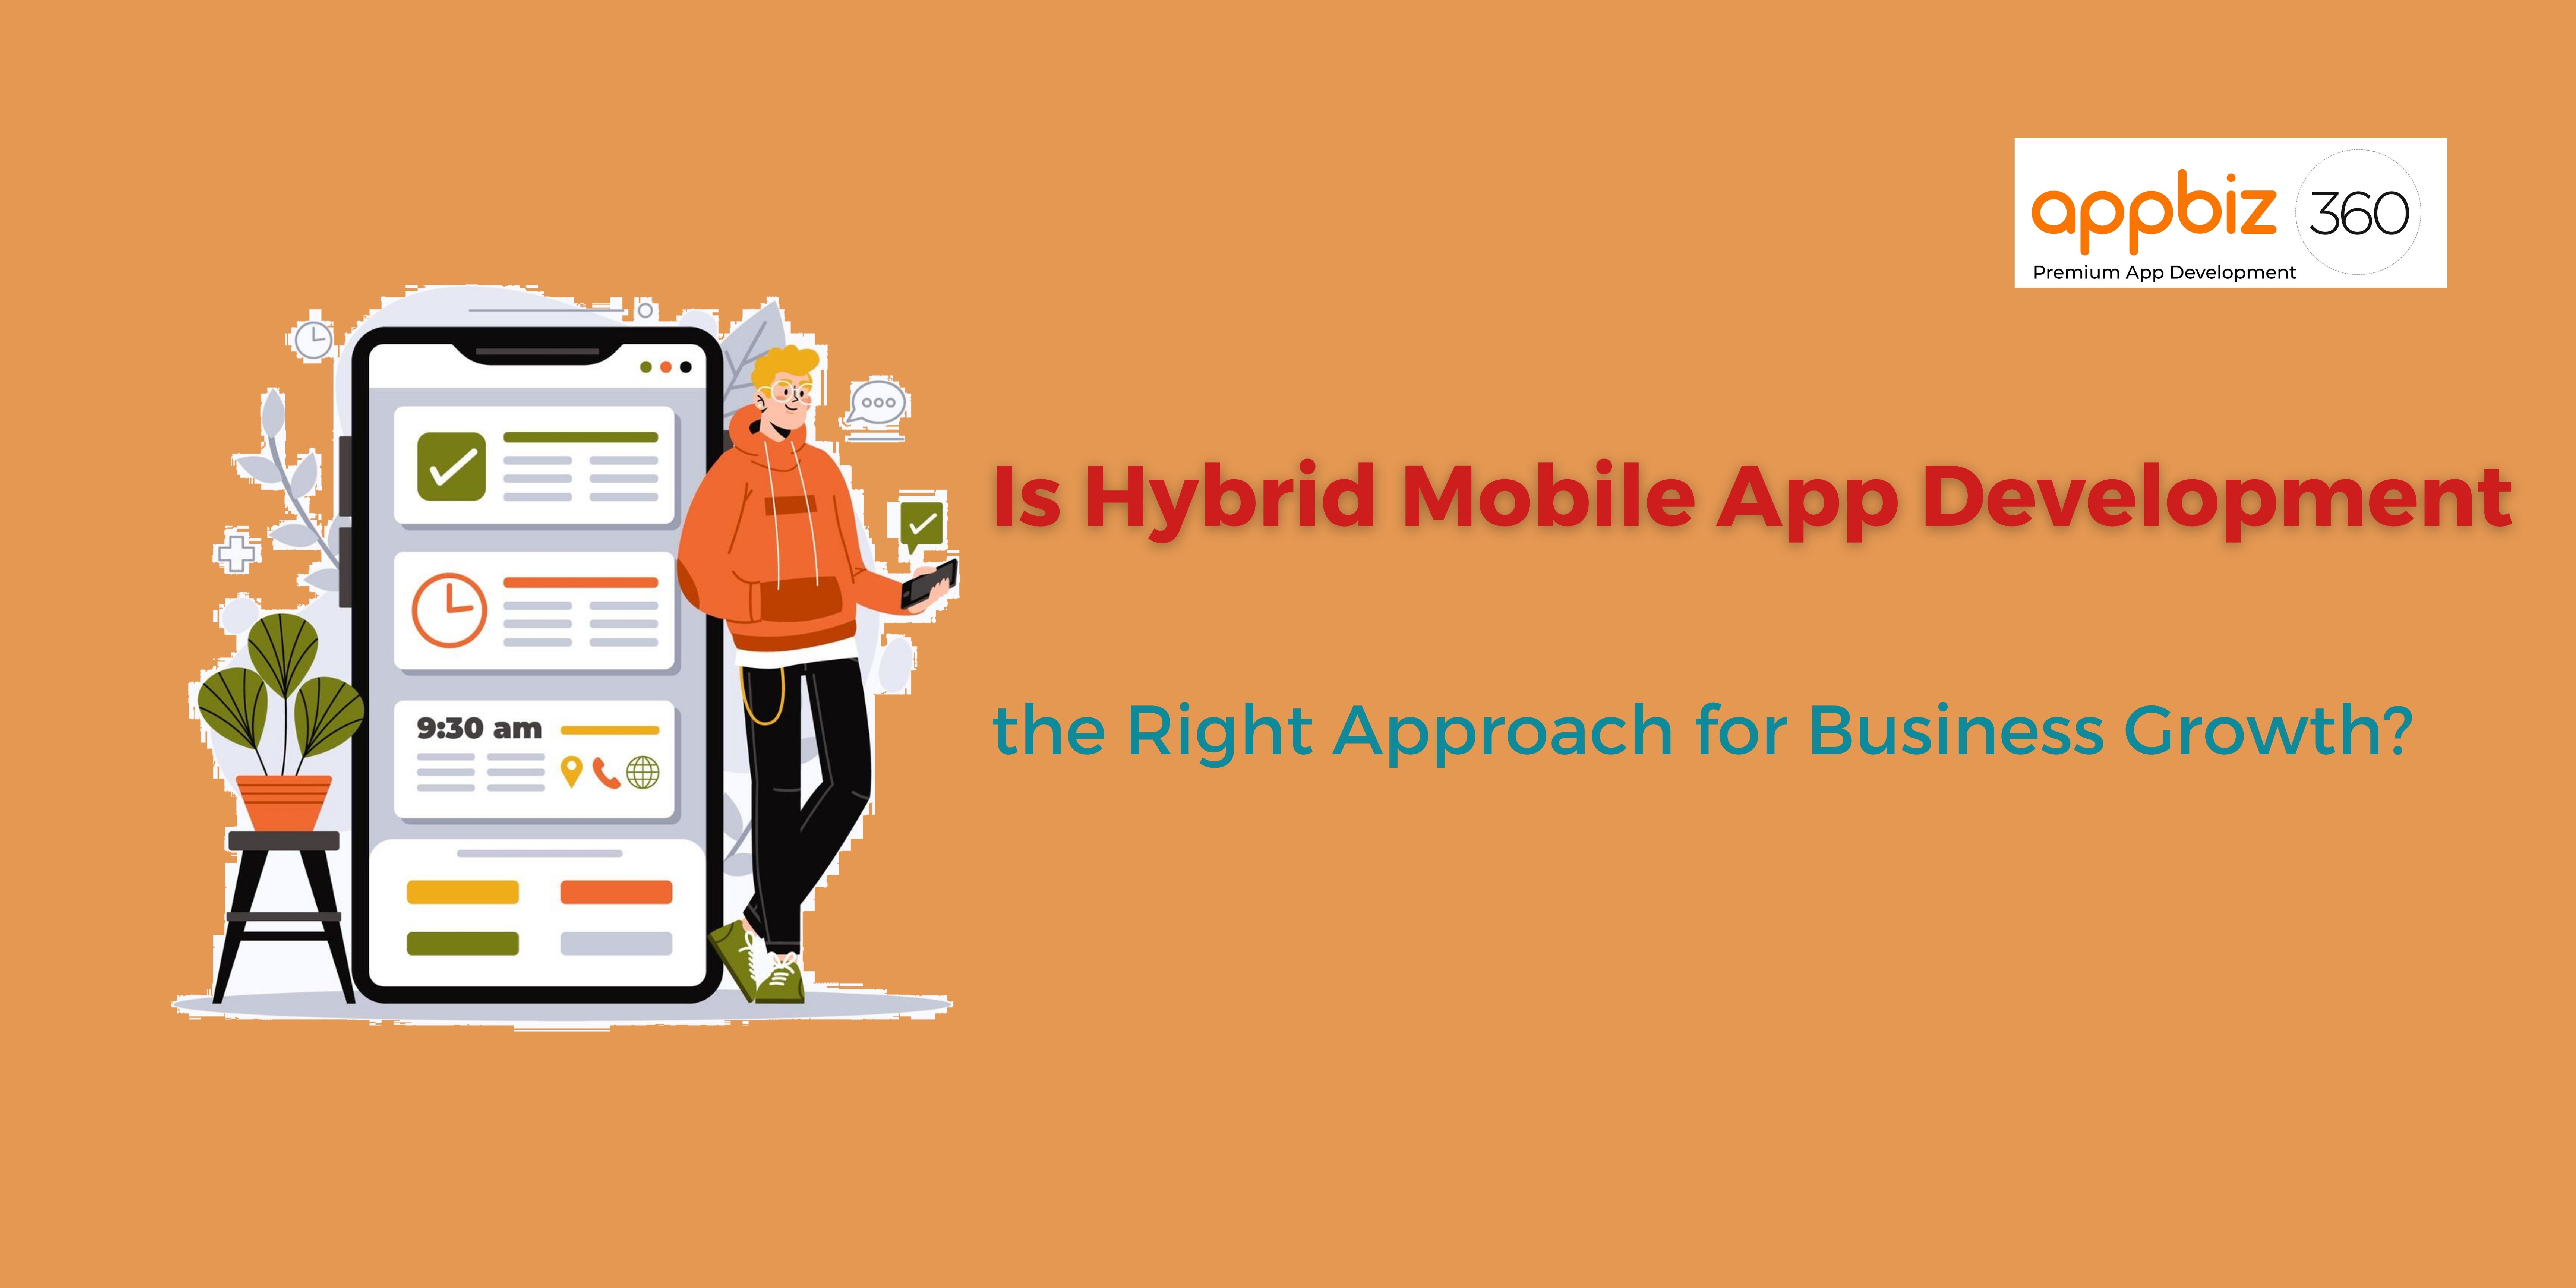 Is Hybrid Mobile App Development the Right Approach for Business Growth?